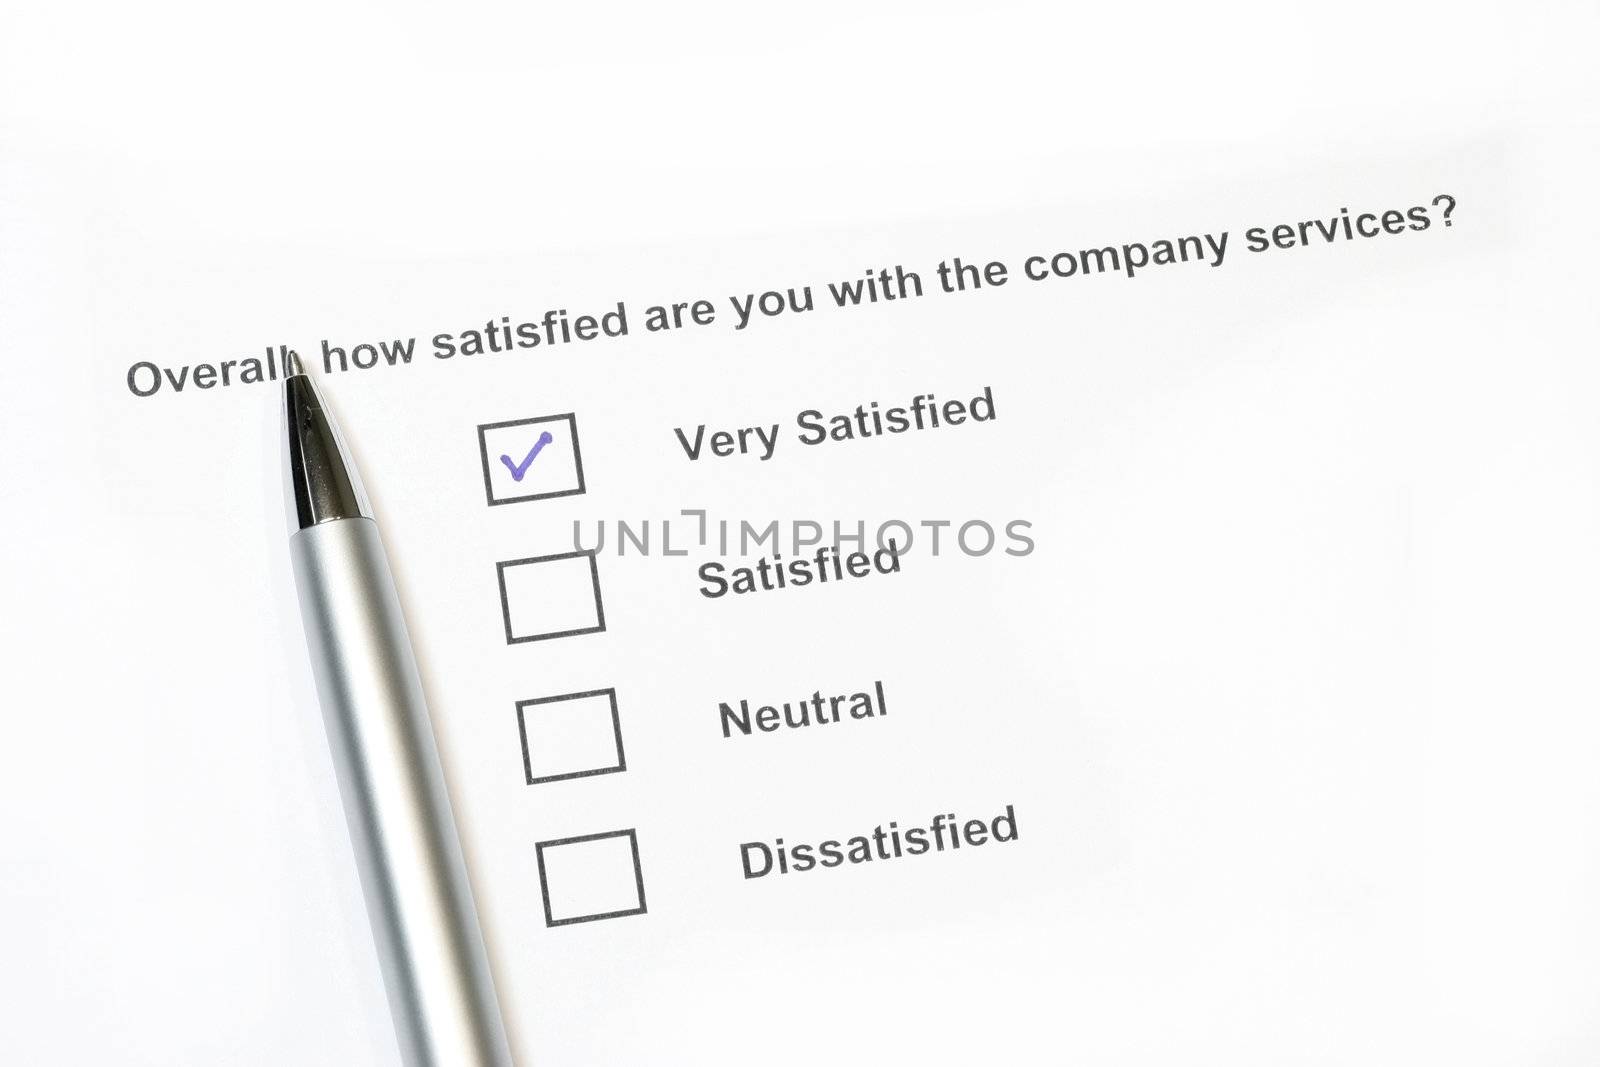 How satisfied are you survey with pen